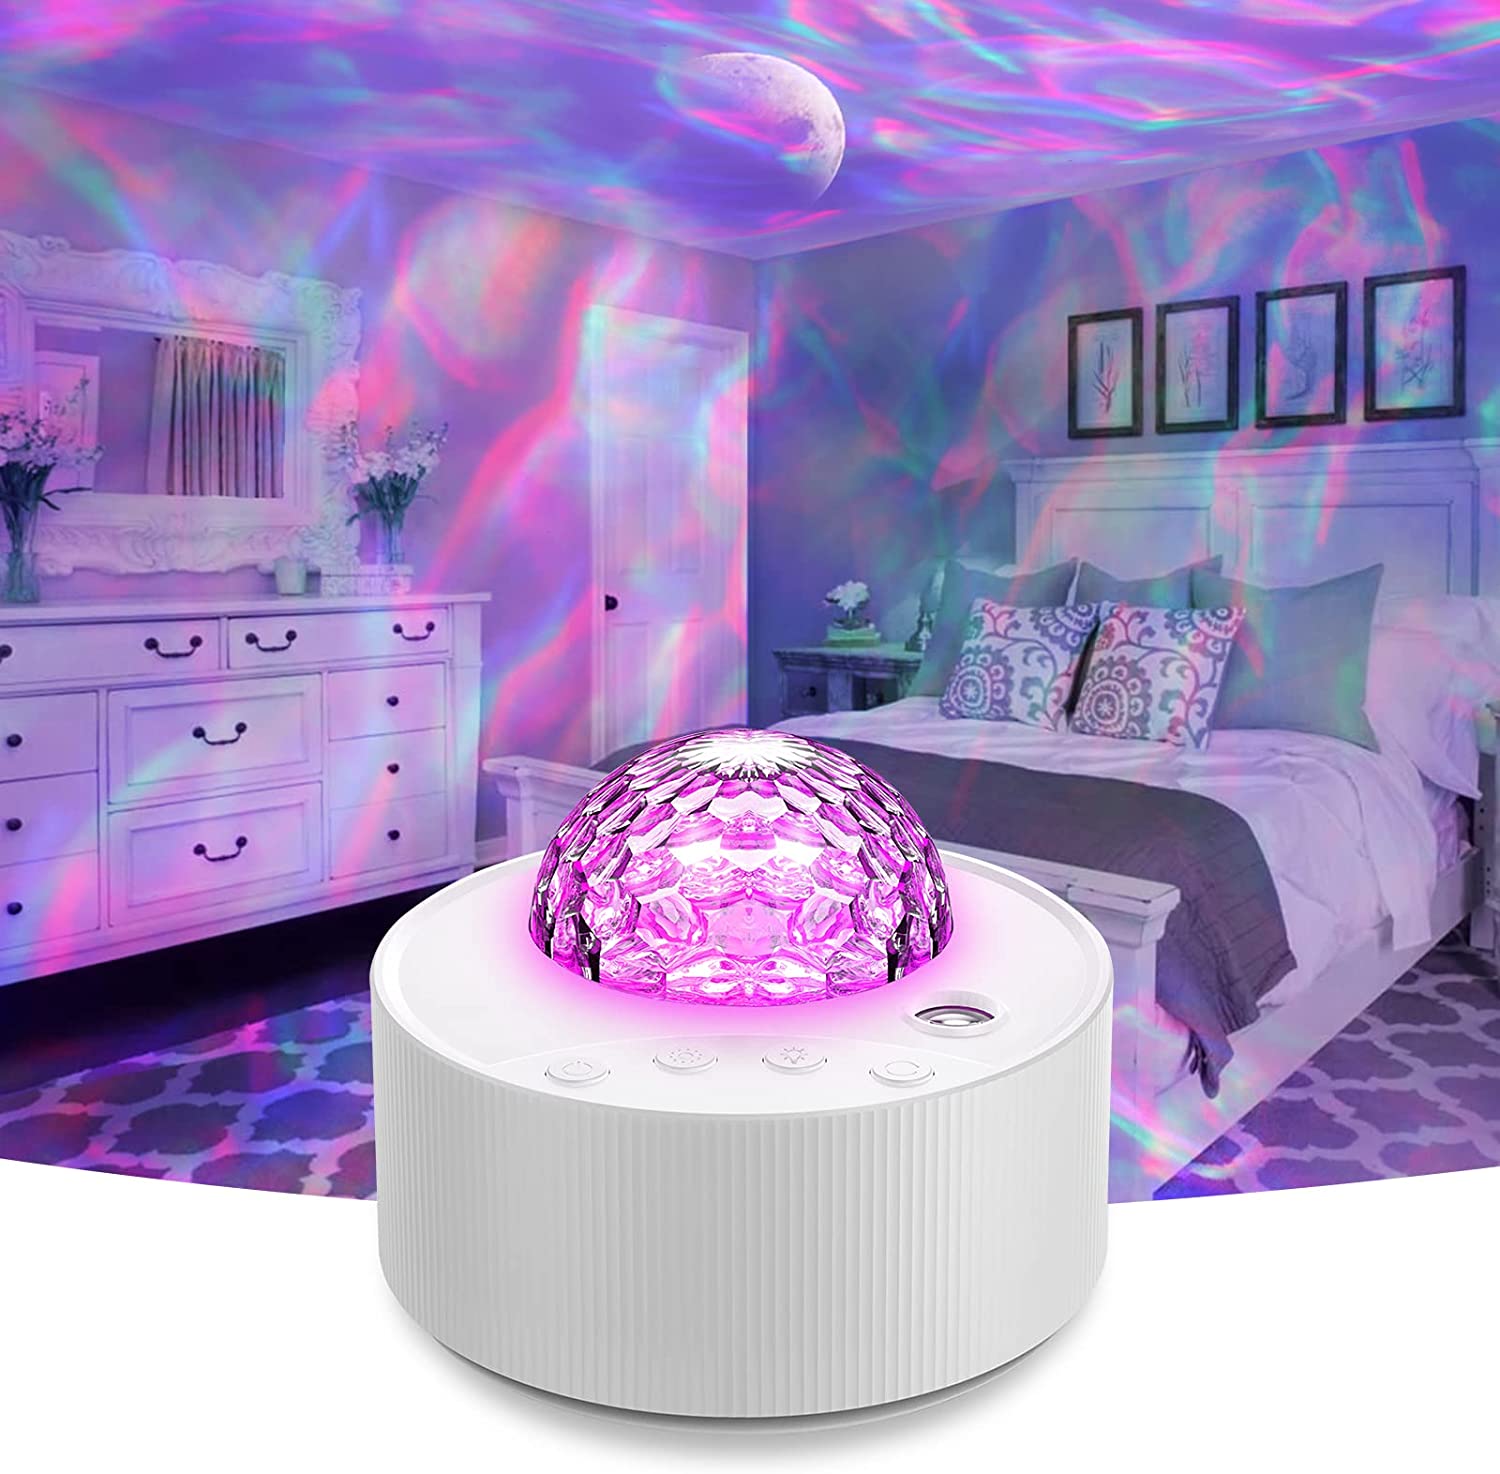 Moredig LED Galaxy Light Projector, 13-Color Ocean Wave Sensory Lights for Bedroom, Party, Game Rooms, Kids, Adults, Christmas Decor (Middle, 13 Colors) 2